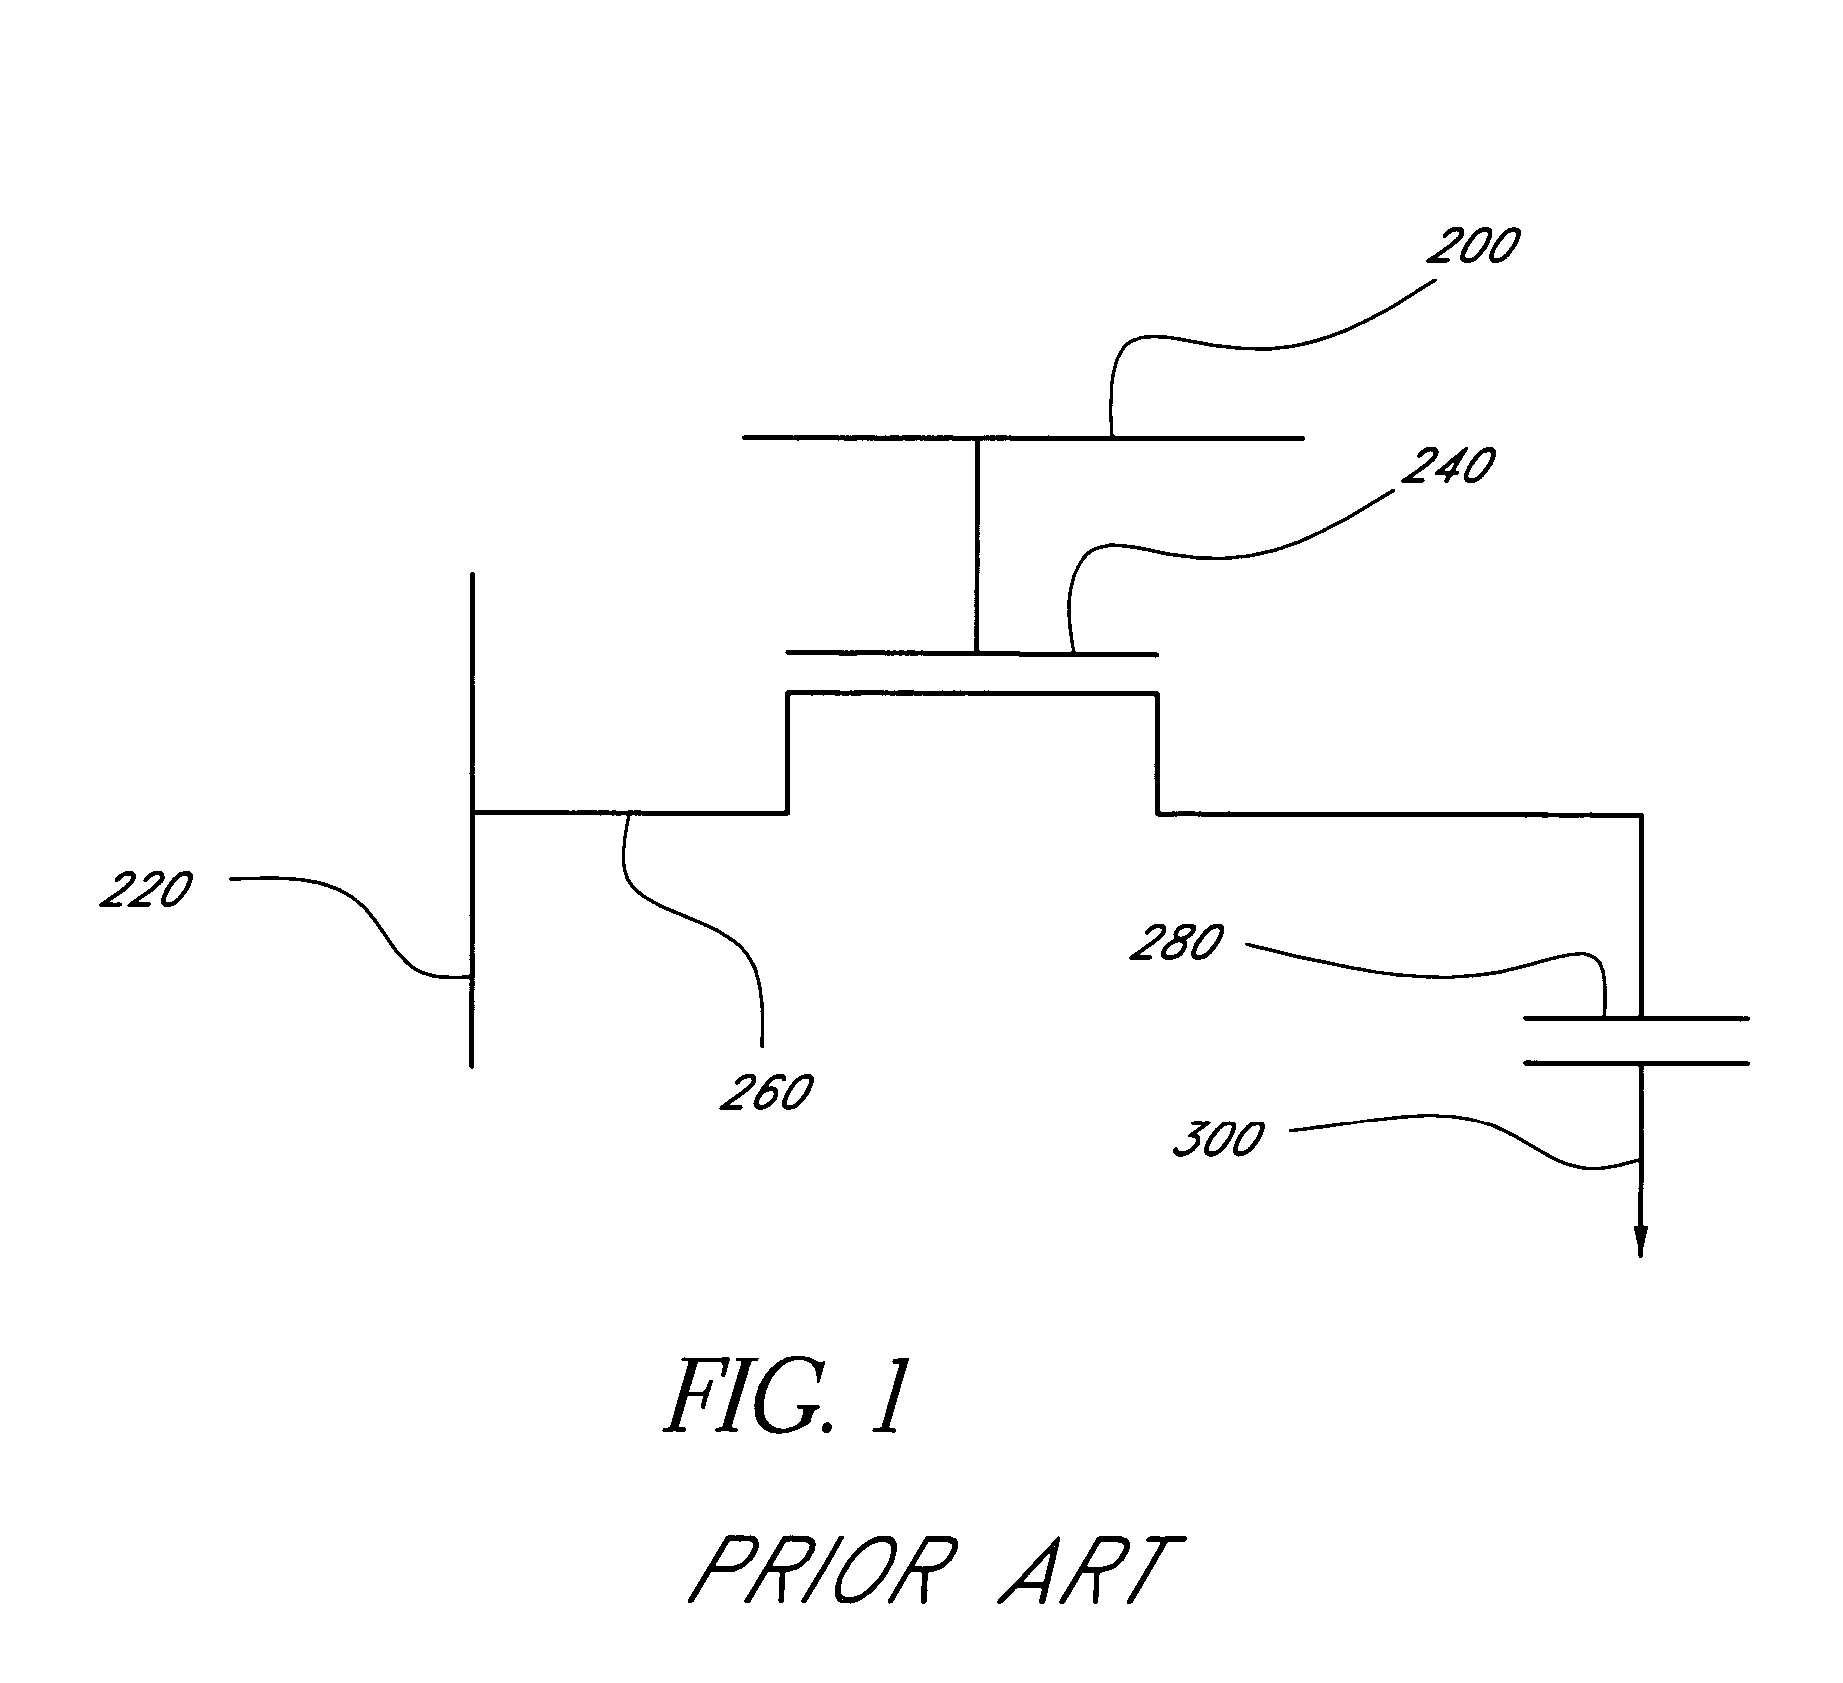 Methods of metallization for microelectronic devices utilizing metal oxide